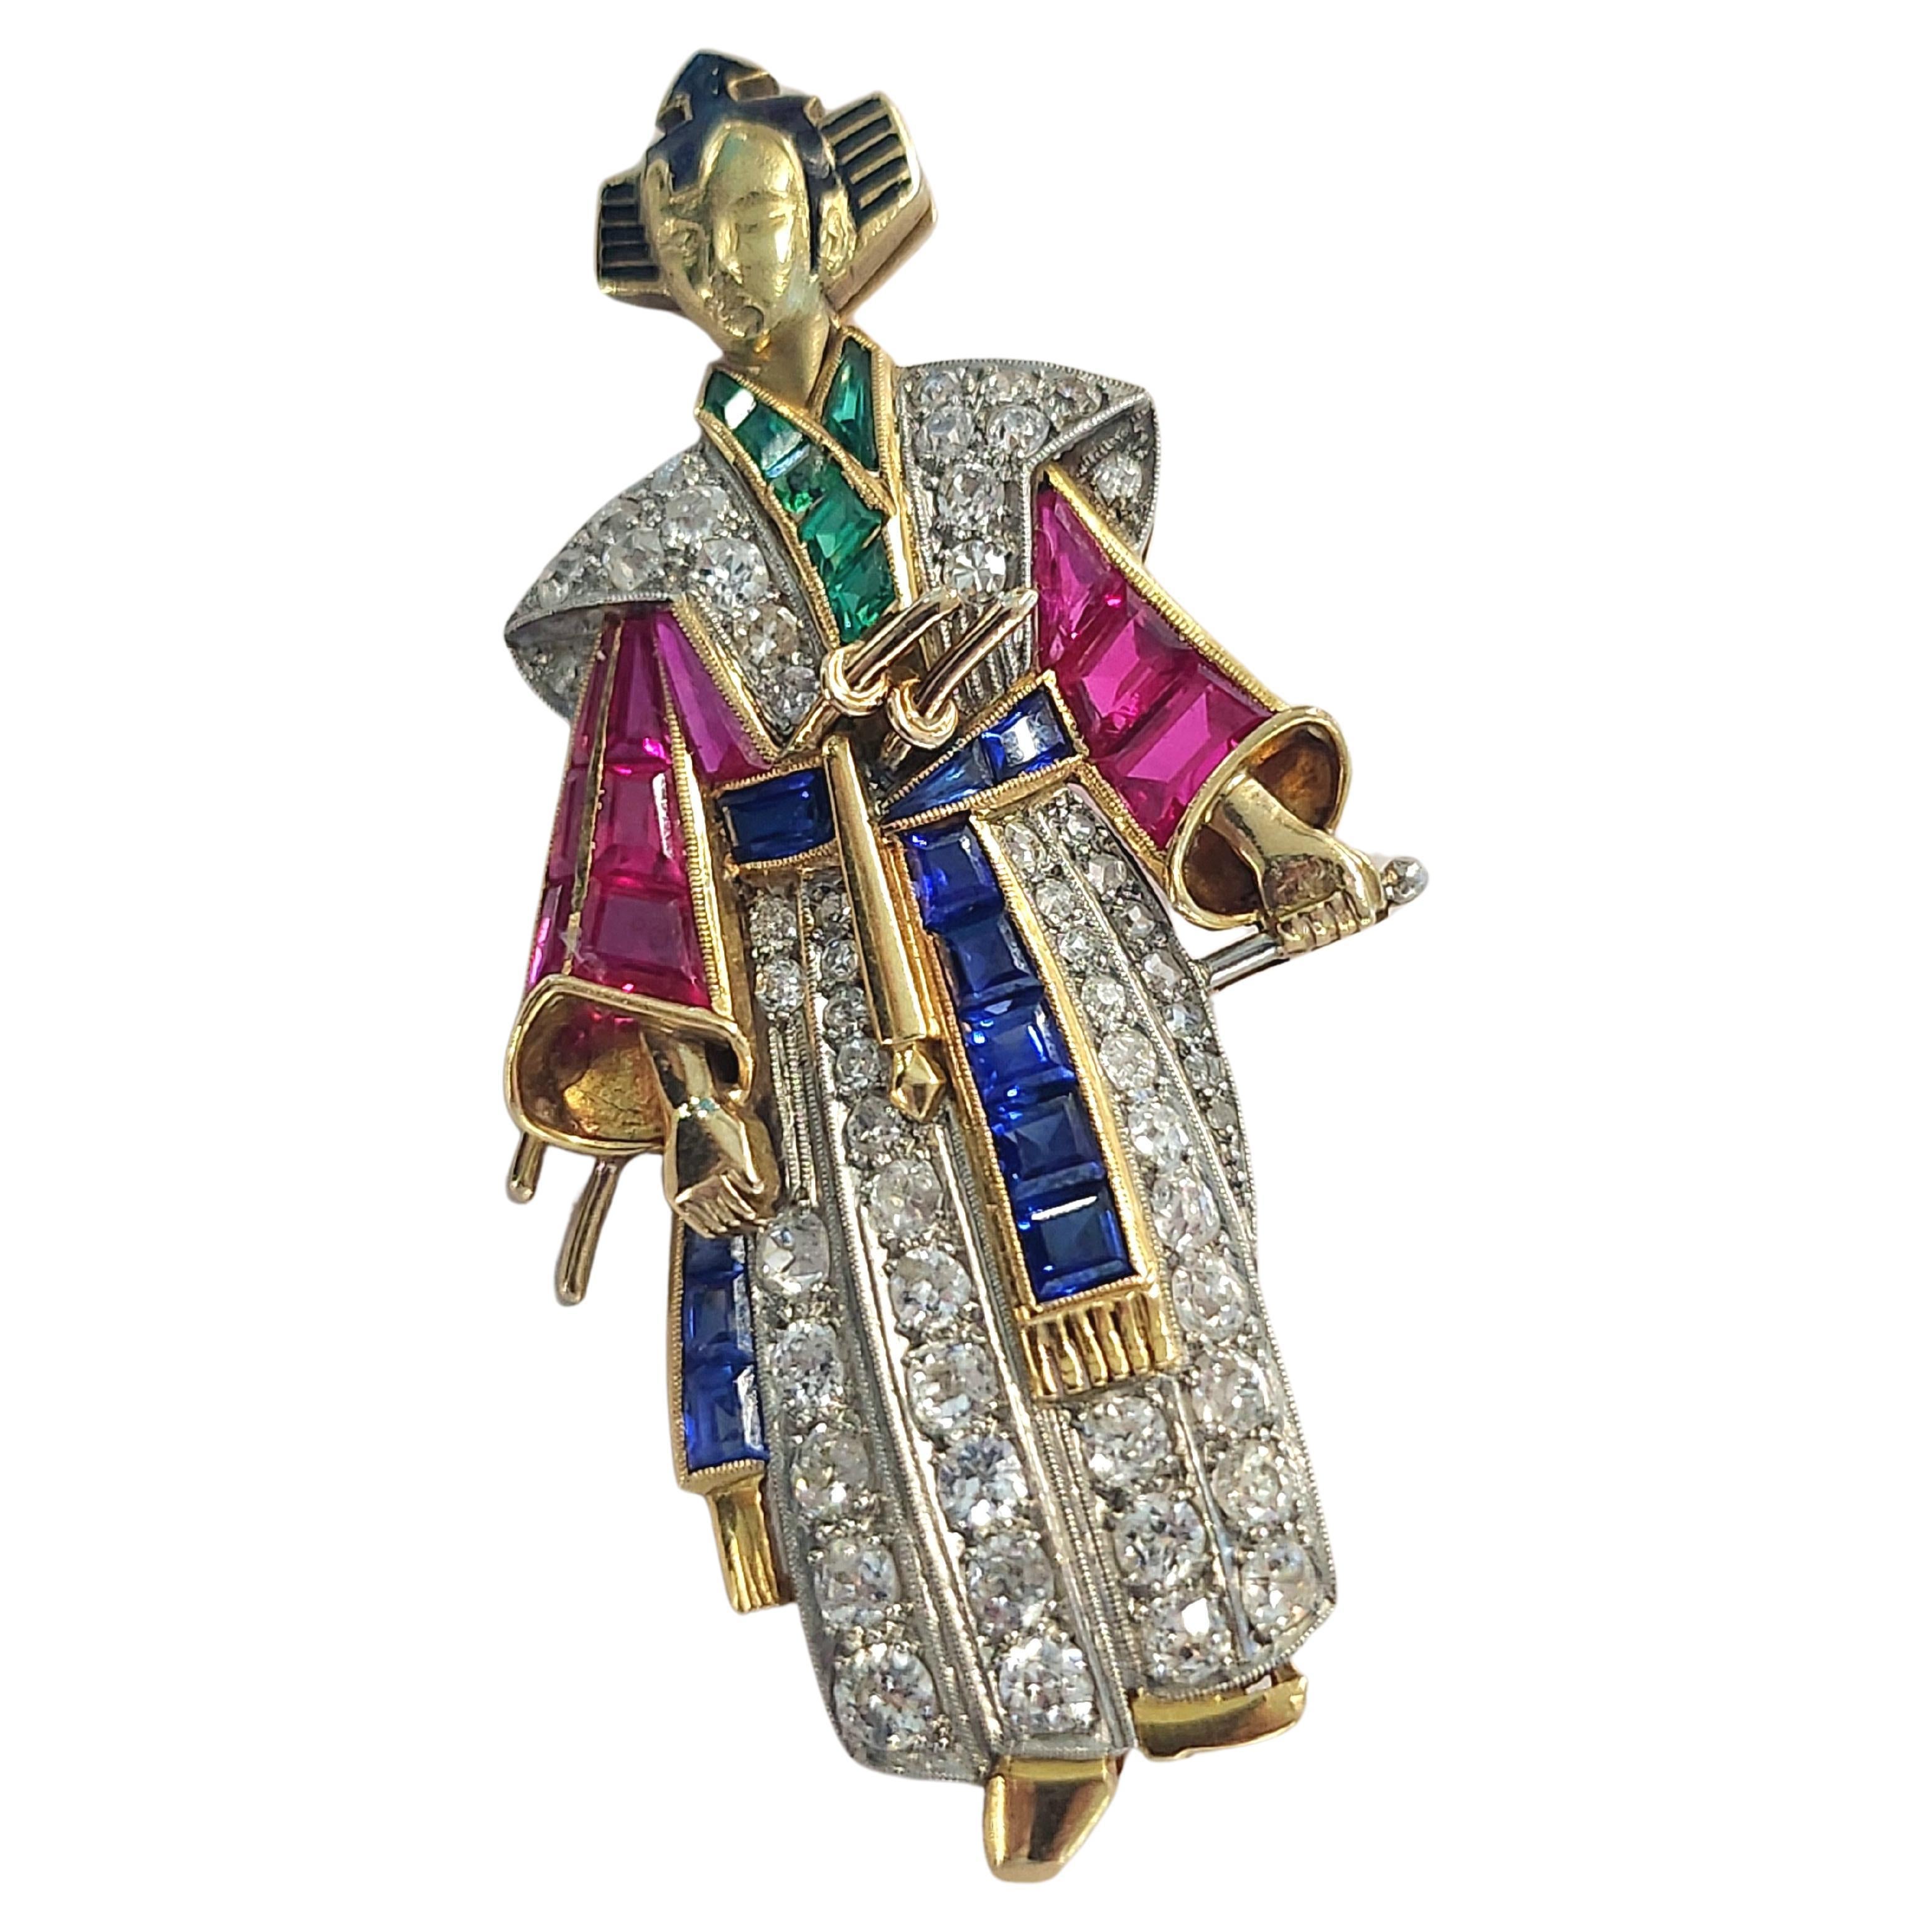 Vintage lare unuswal 18k gold brooch in samurai figure with estimate brilliant cut diamonds weight 5 carats H color white vs clearity and natural navy blue sapphires and nutural rubies 